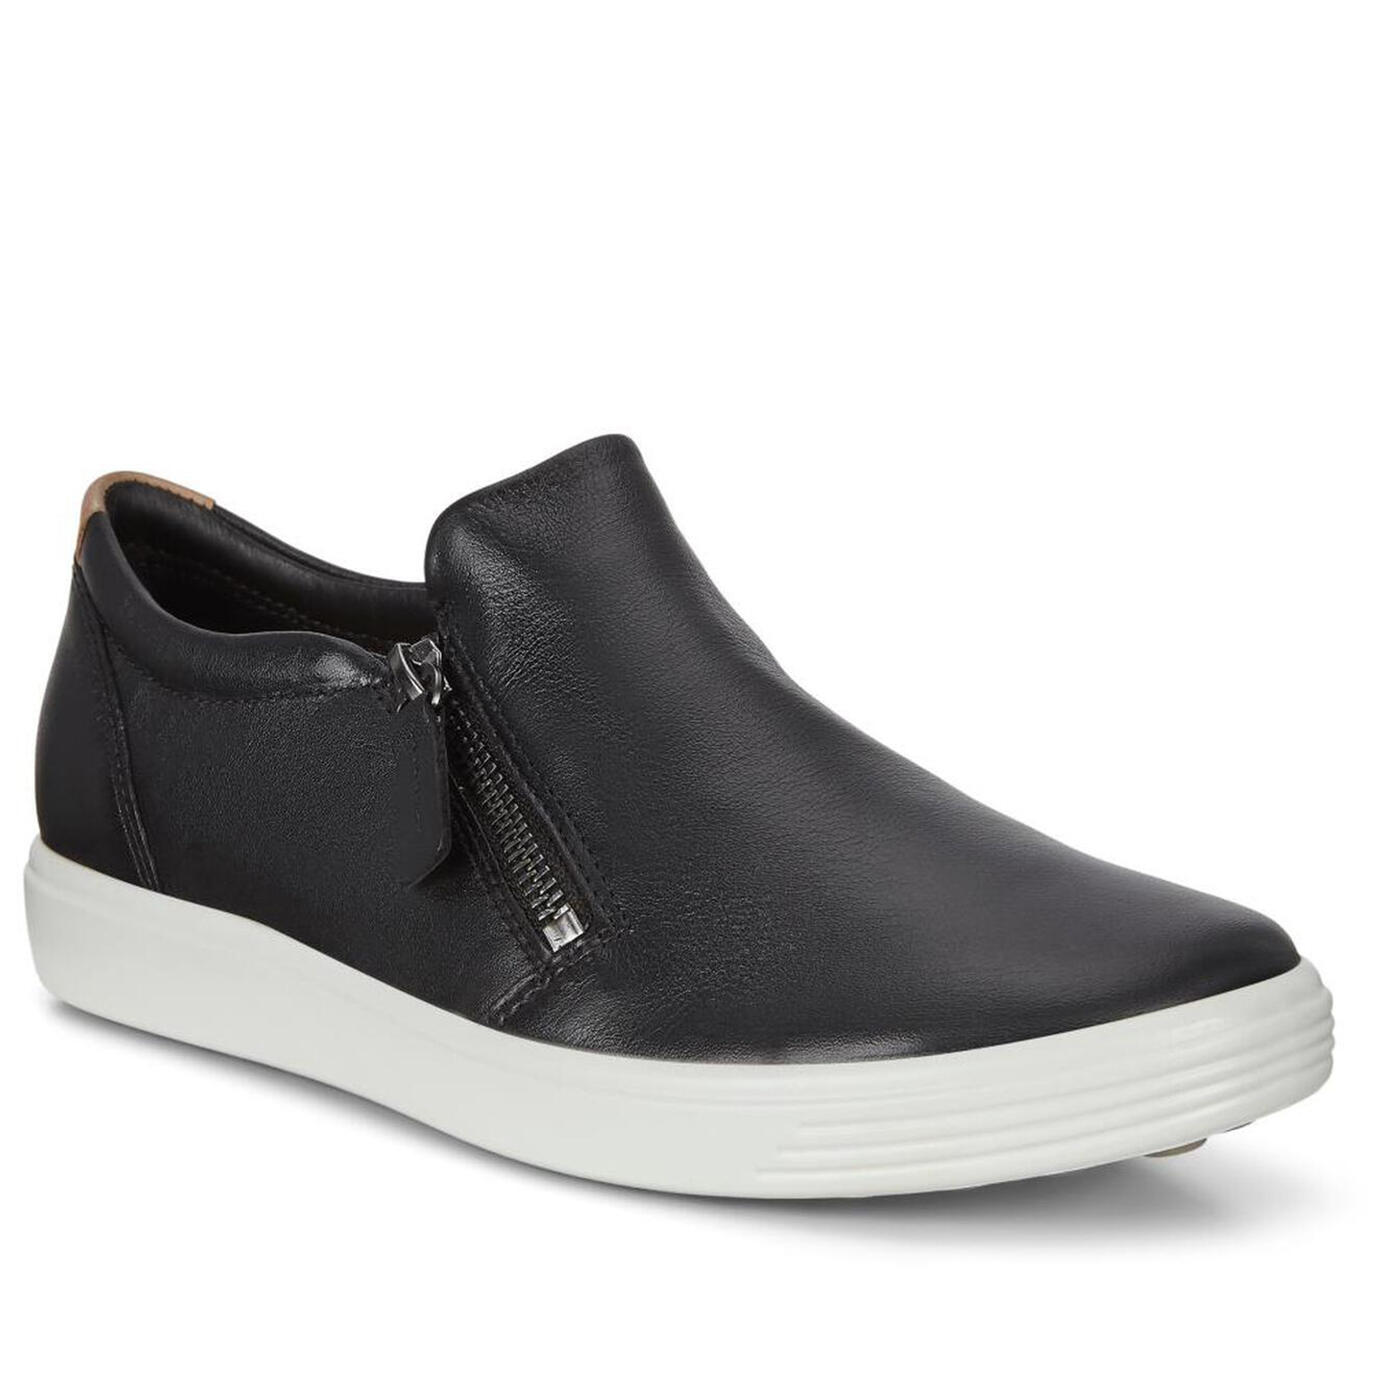 Women's Soft 7 Slip-on Sneakers | ECCO® Shoes